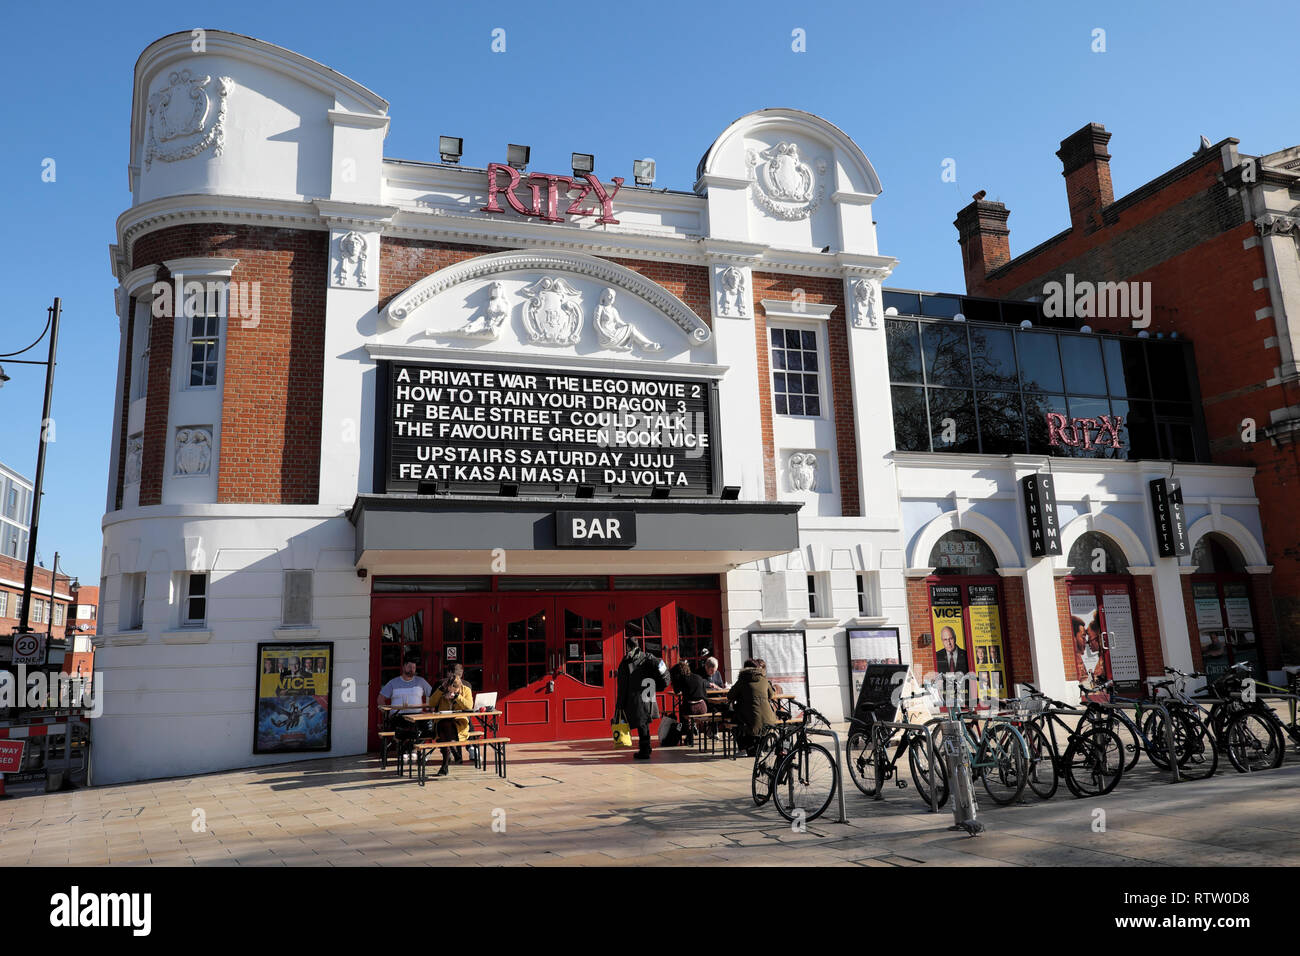 Ritzy Cinema and Bar outside view showing movies films in Brixton street scene South London UK  KATHY DEWITT Stock Photo